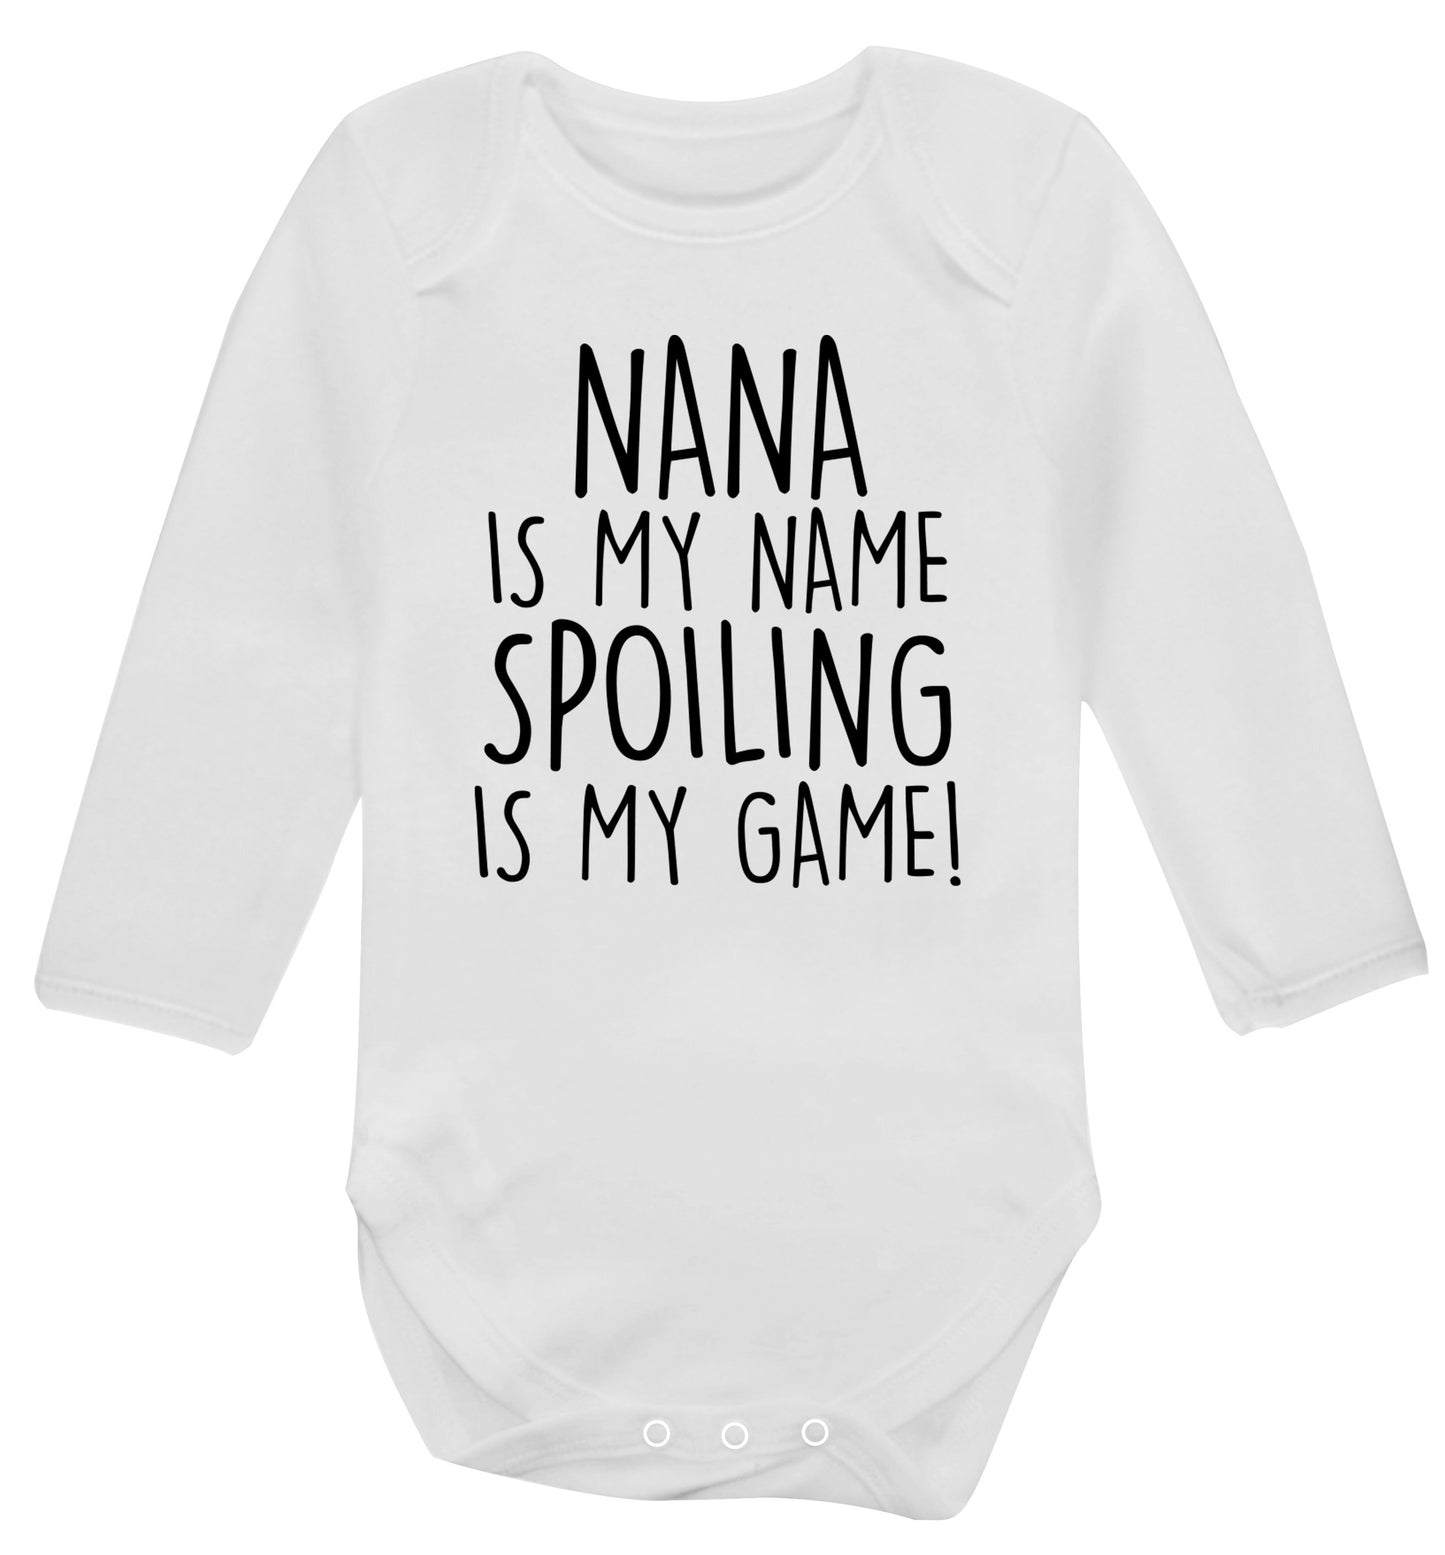 Nana is my name, spoiling is my game Baby Vest long sleeved white 6-12 months